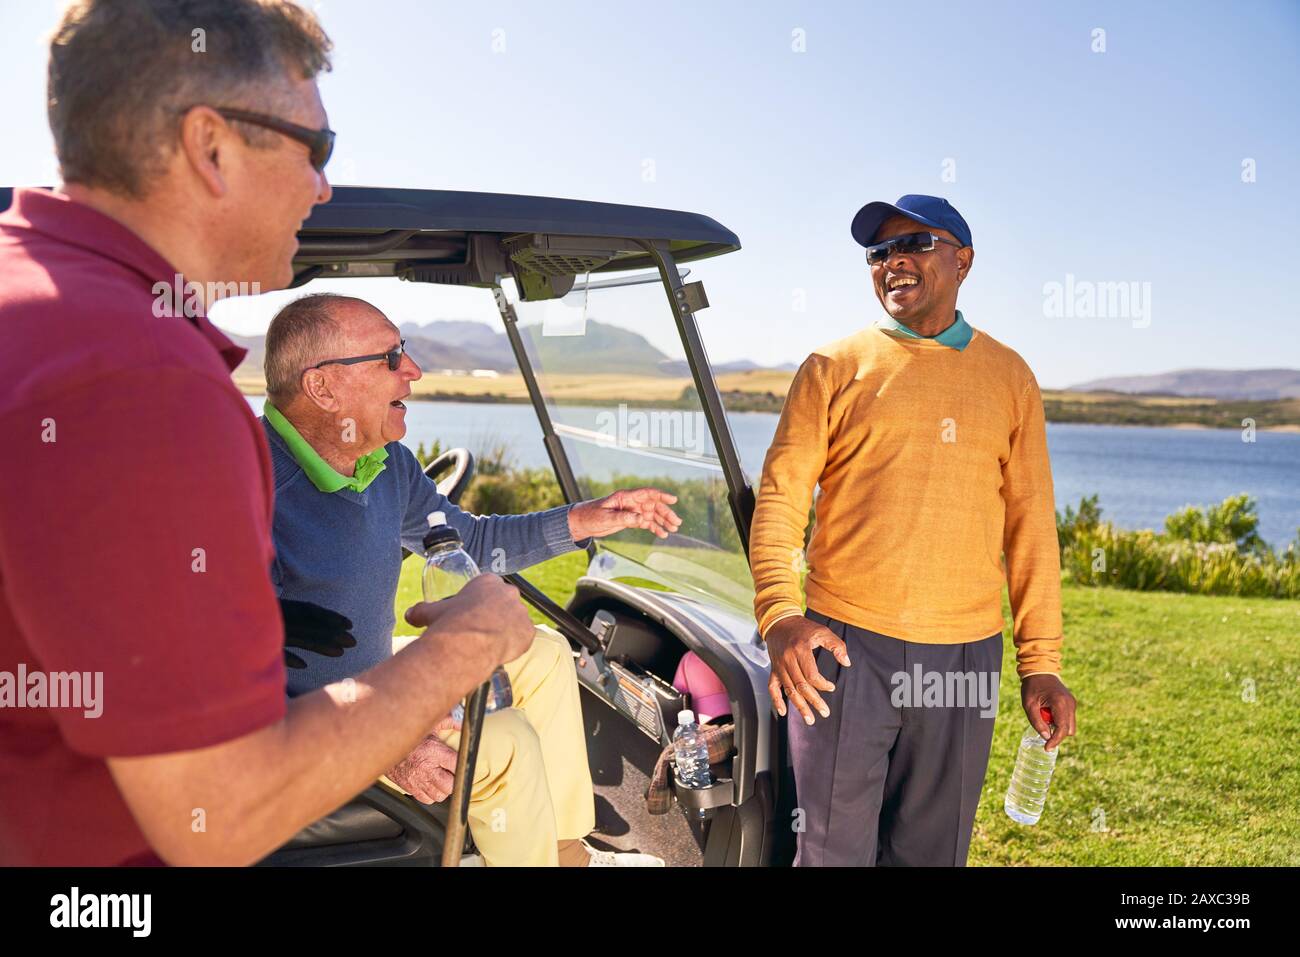 Male golfer friends talking and laughing at golf cart Stock Photo